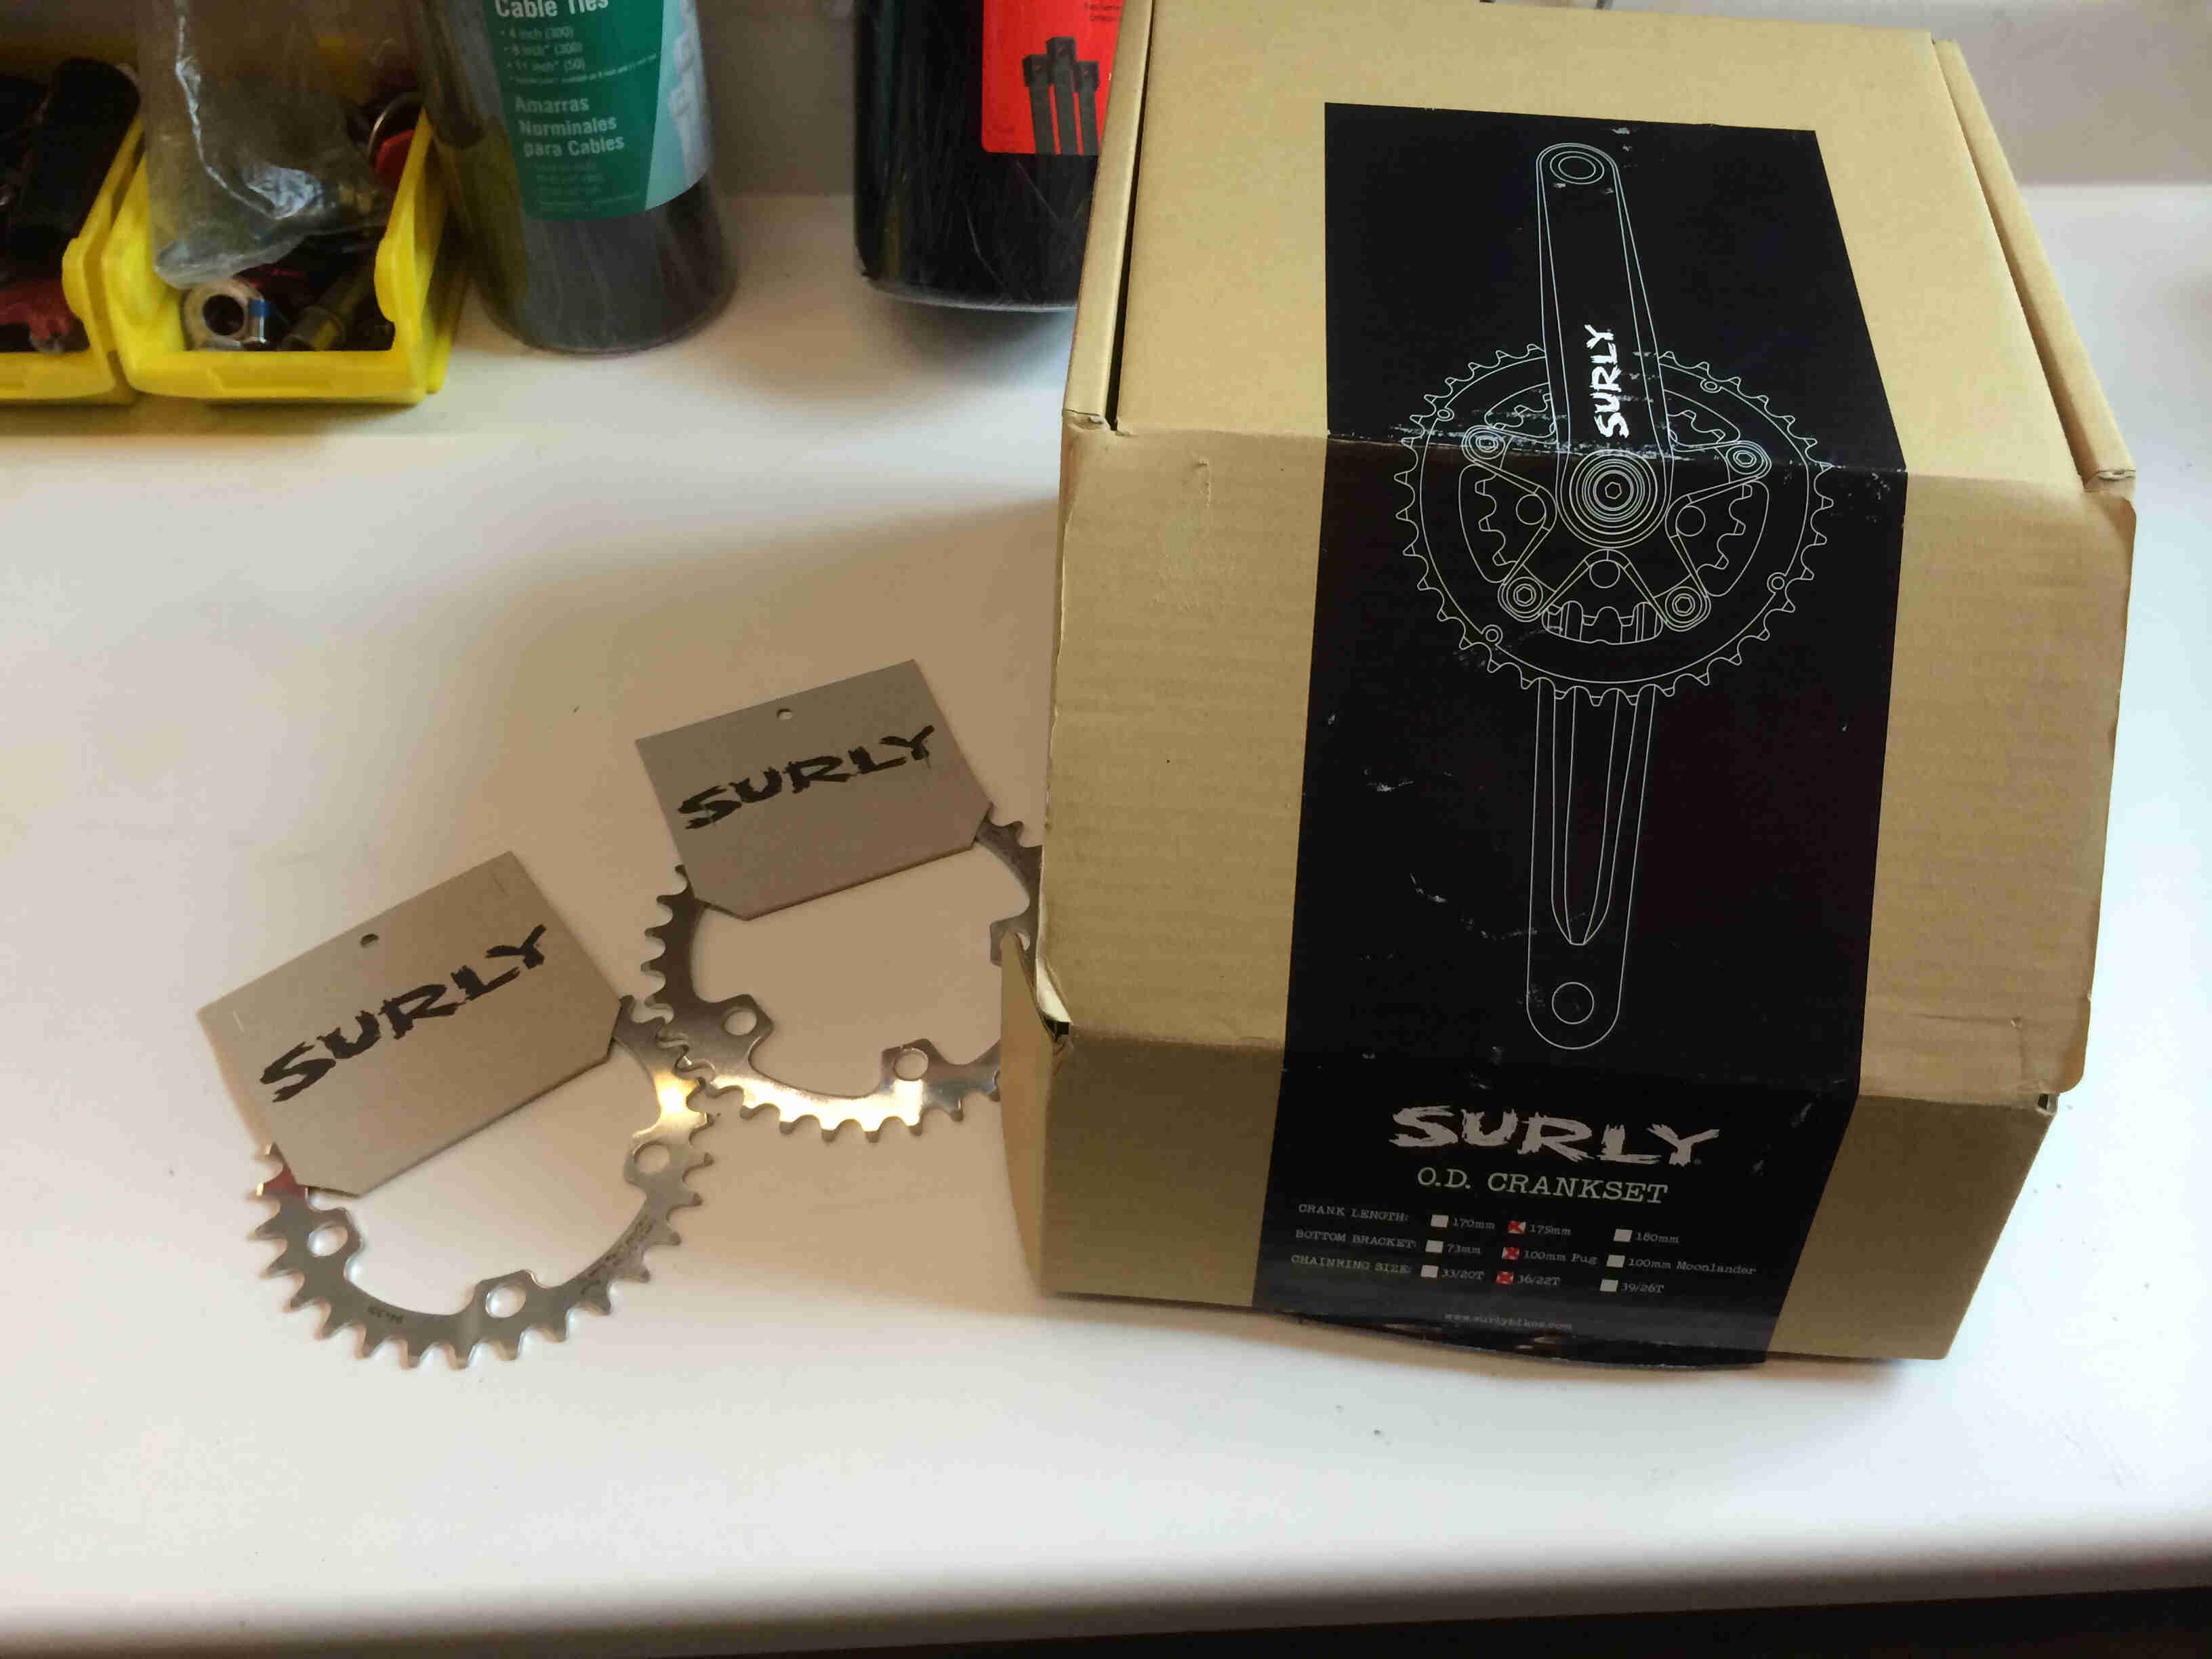 Two Surly Bikes chainrings, sitting on a table next to a  box with a label that shows a graphic of a Surly O.D Crankset